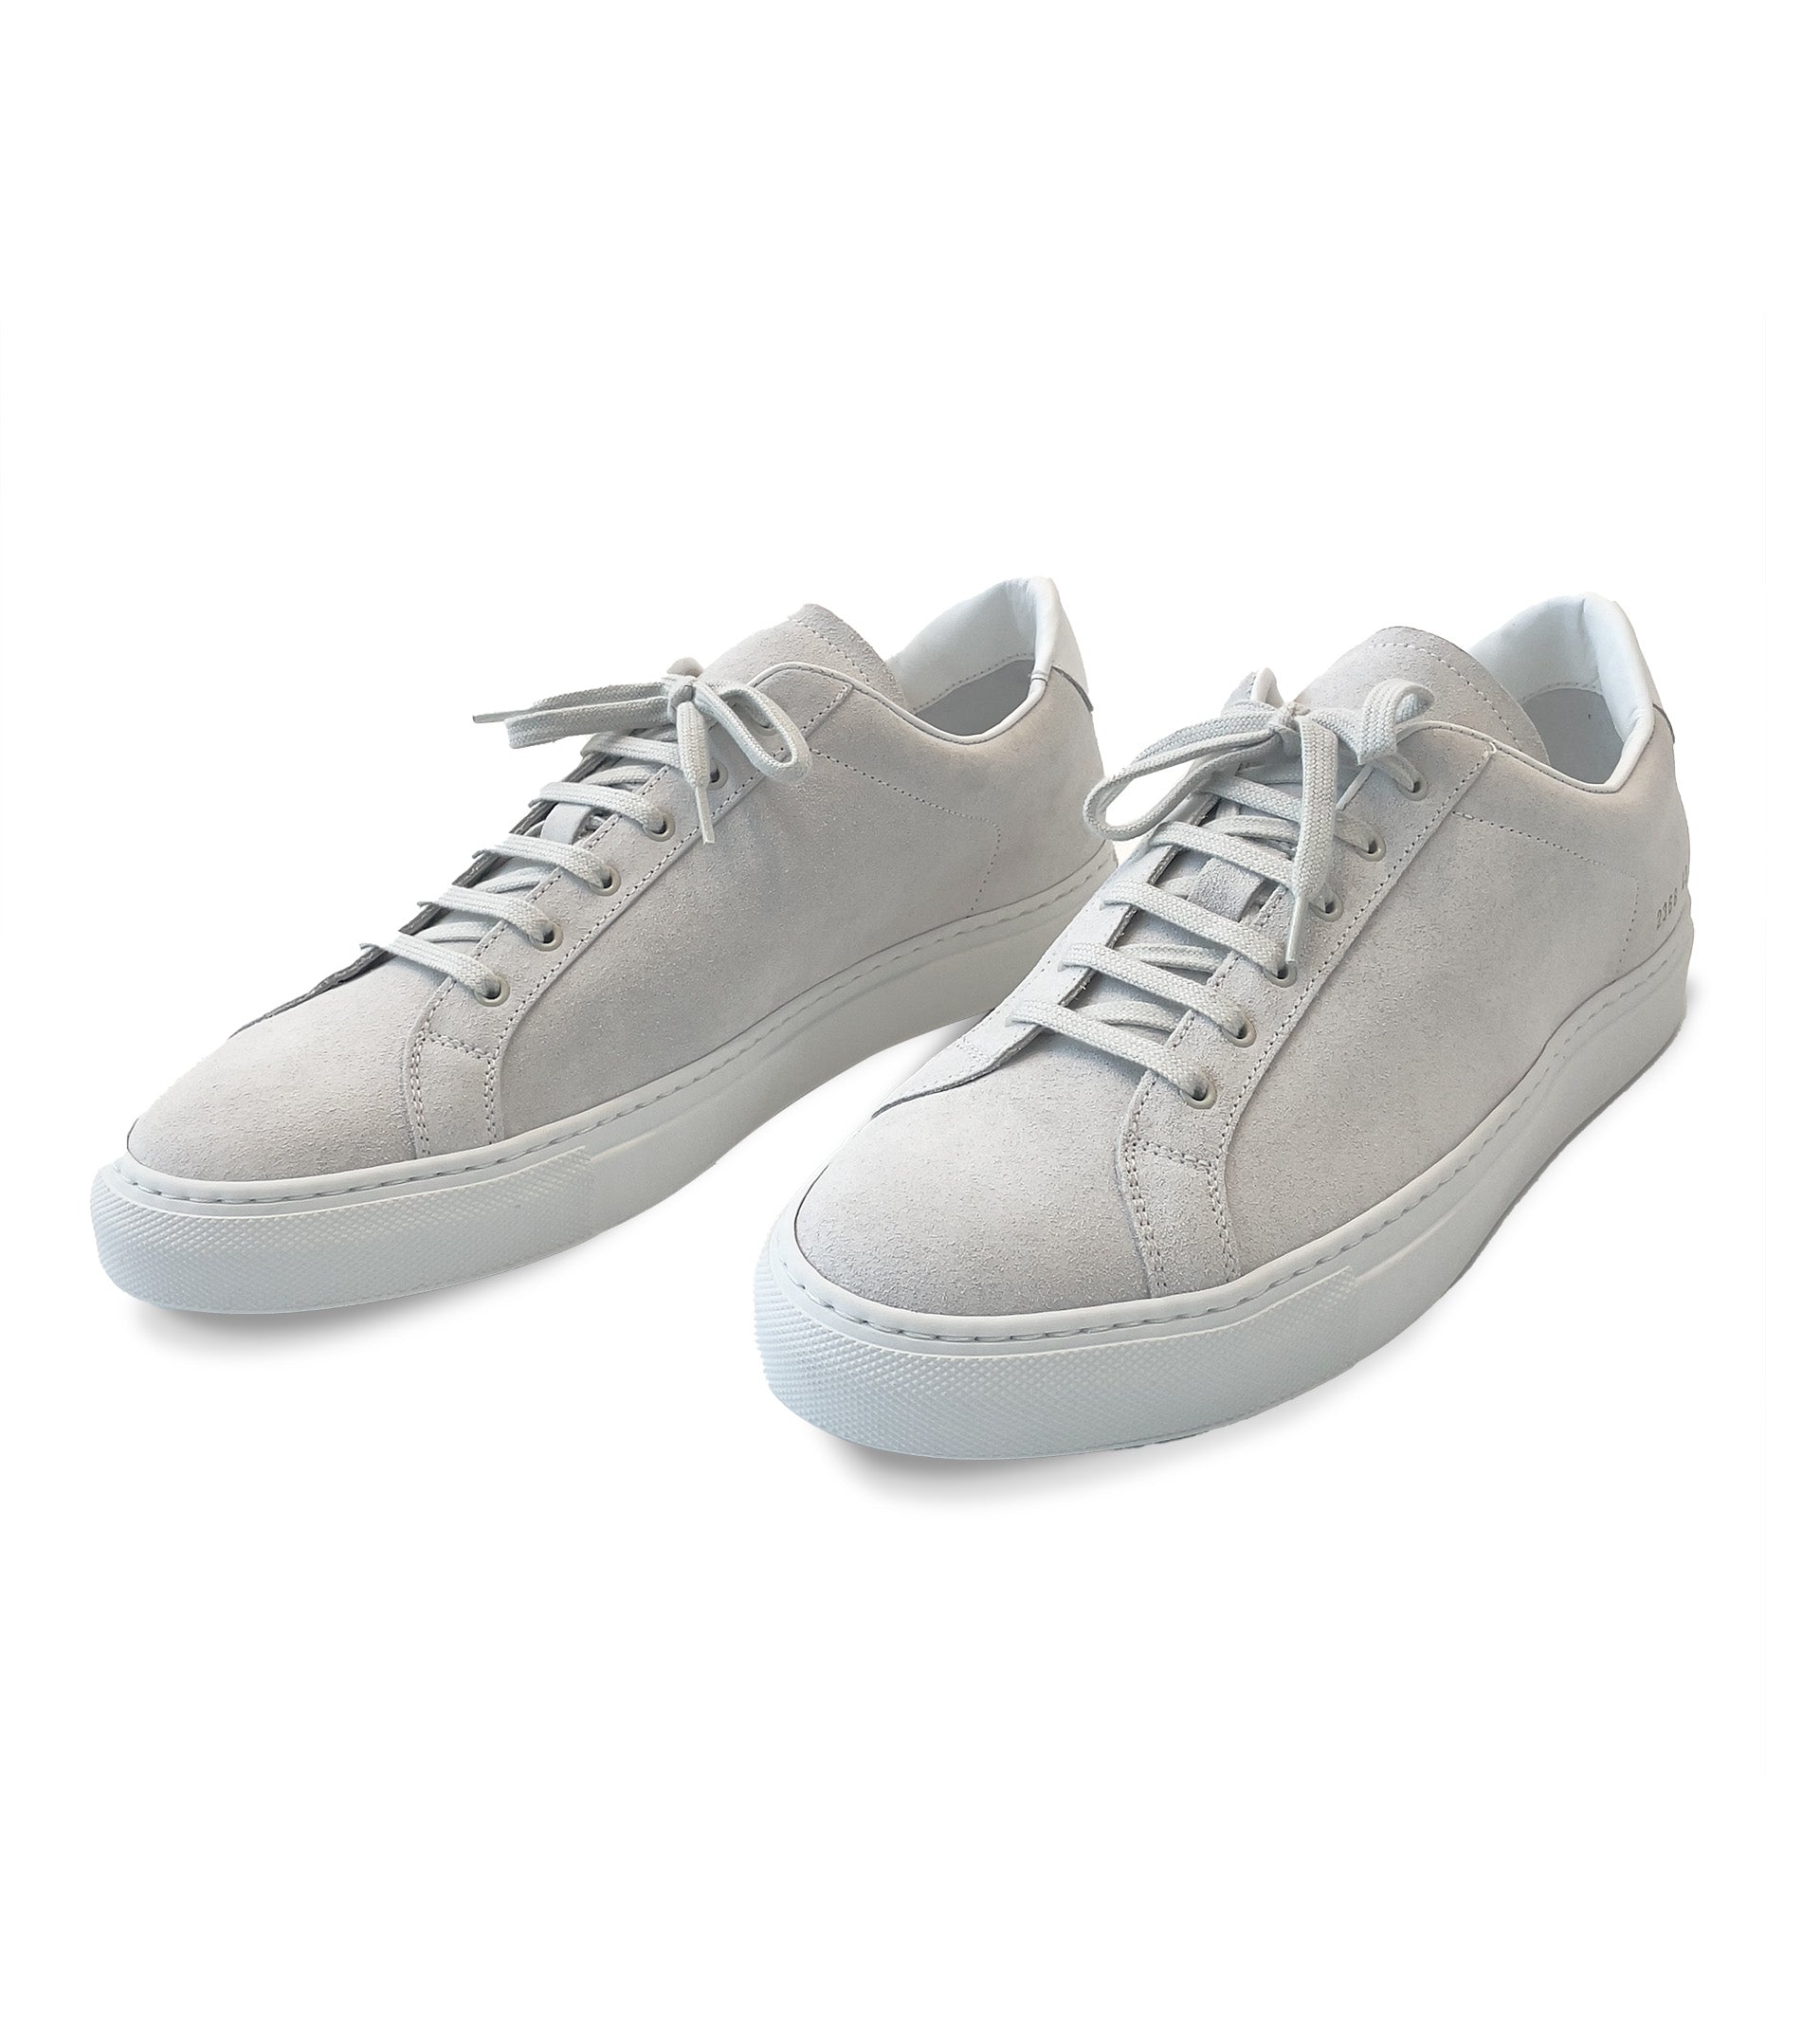 COMMON PROJECTS Retro Low in White Suede